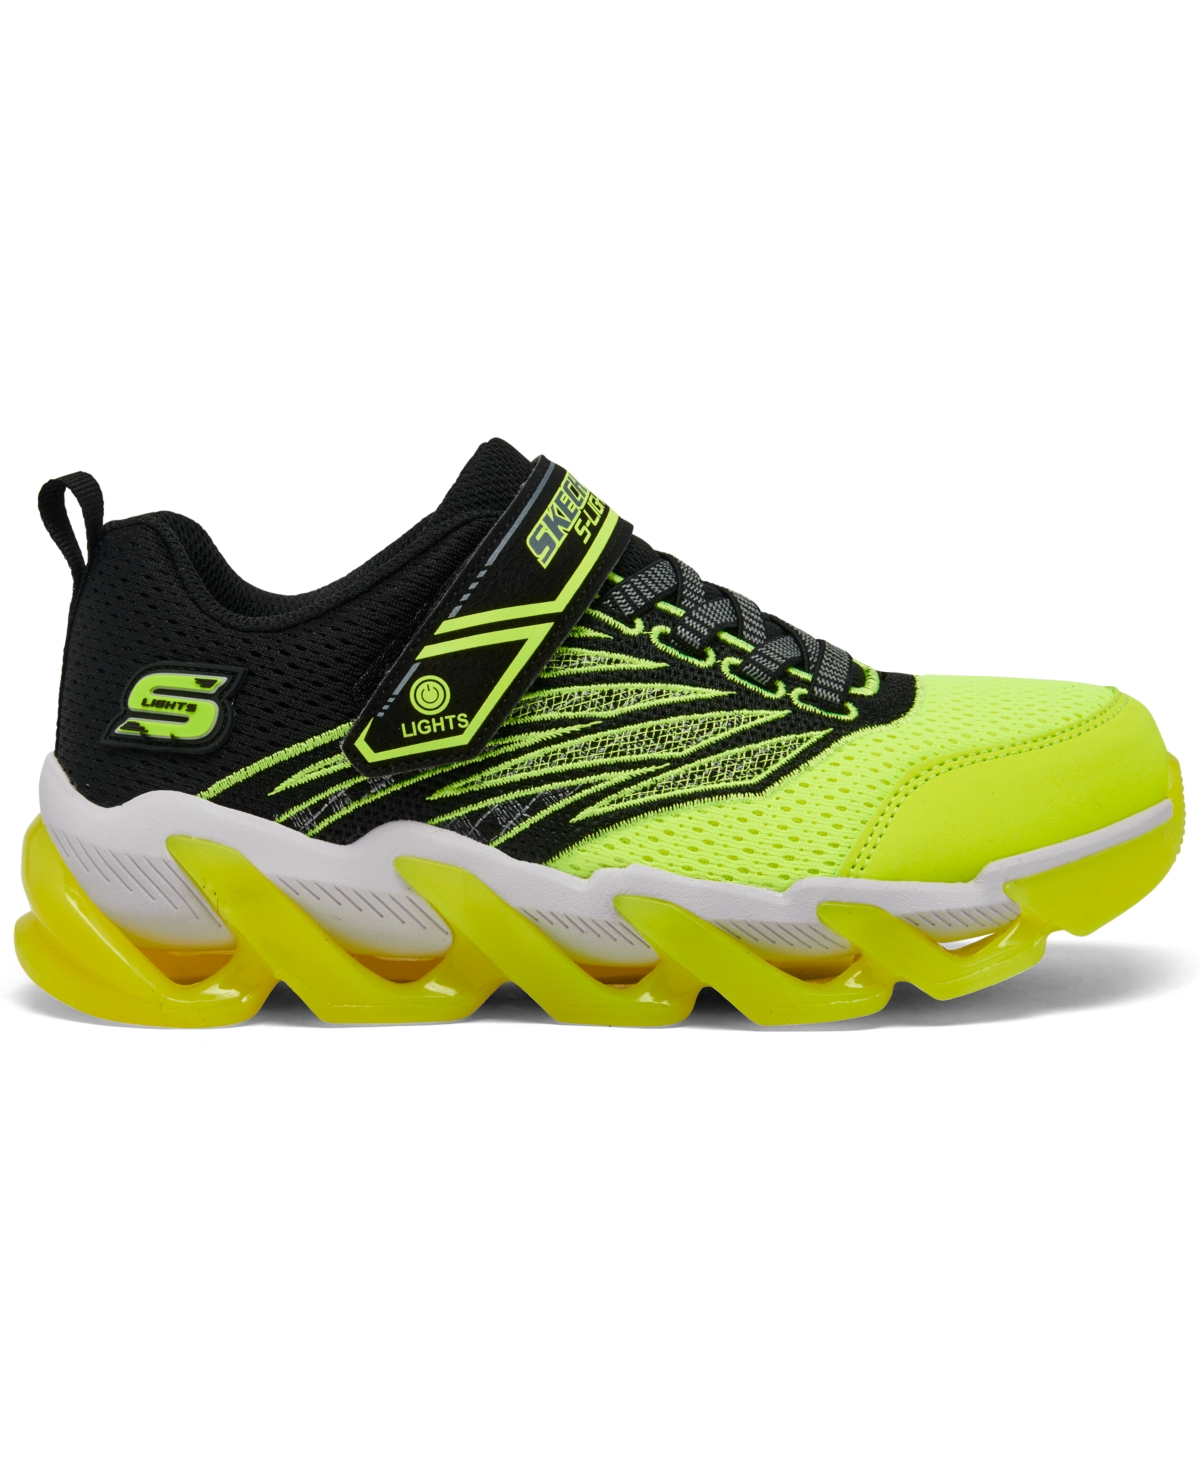 Skechers Kids' Little Boys' S Lights: Mega Surge Stay-put Closure Light-up Casual Athletic Sneakers From Finish Lin In Black,yellow